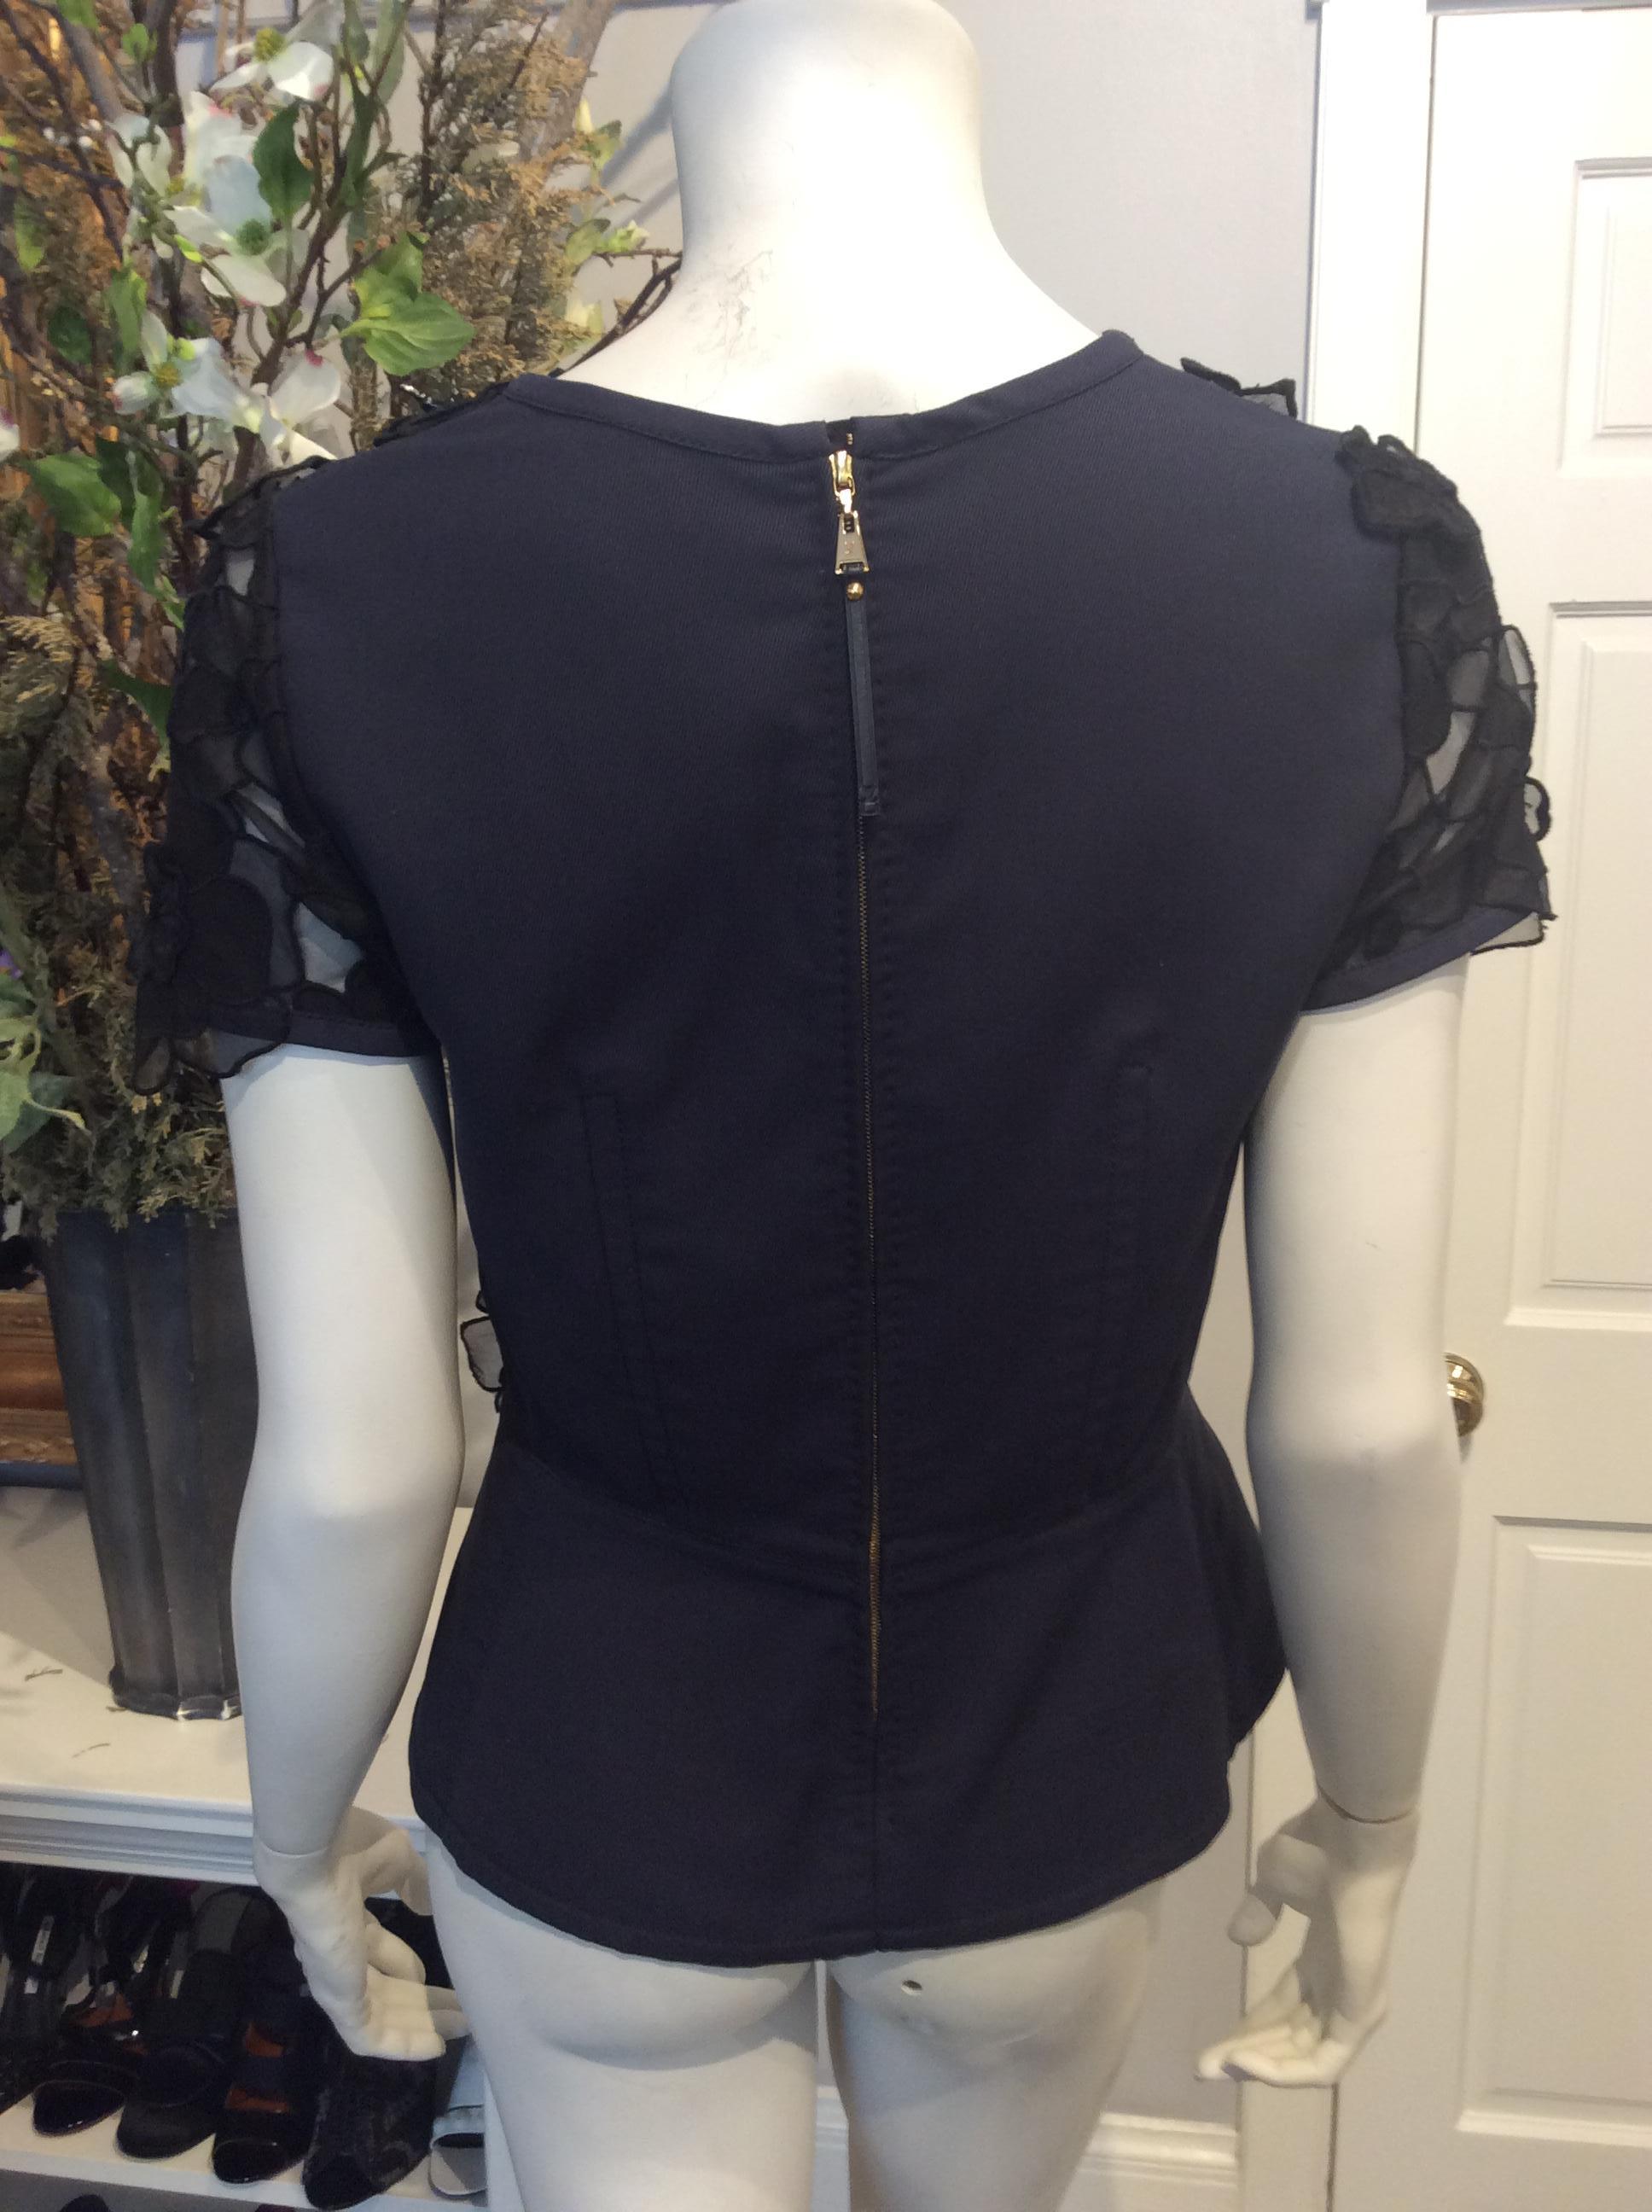 Louis Vuitton Navy and Black Semi Sheer Top w/ Flowers and Beads Sz Fr38/Us6 For Sale 1